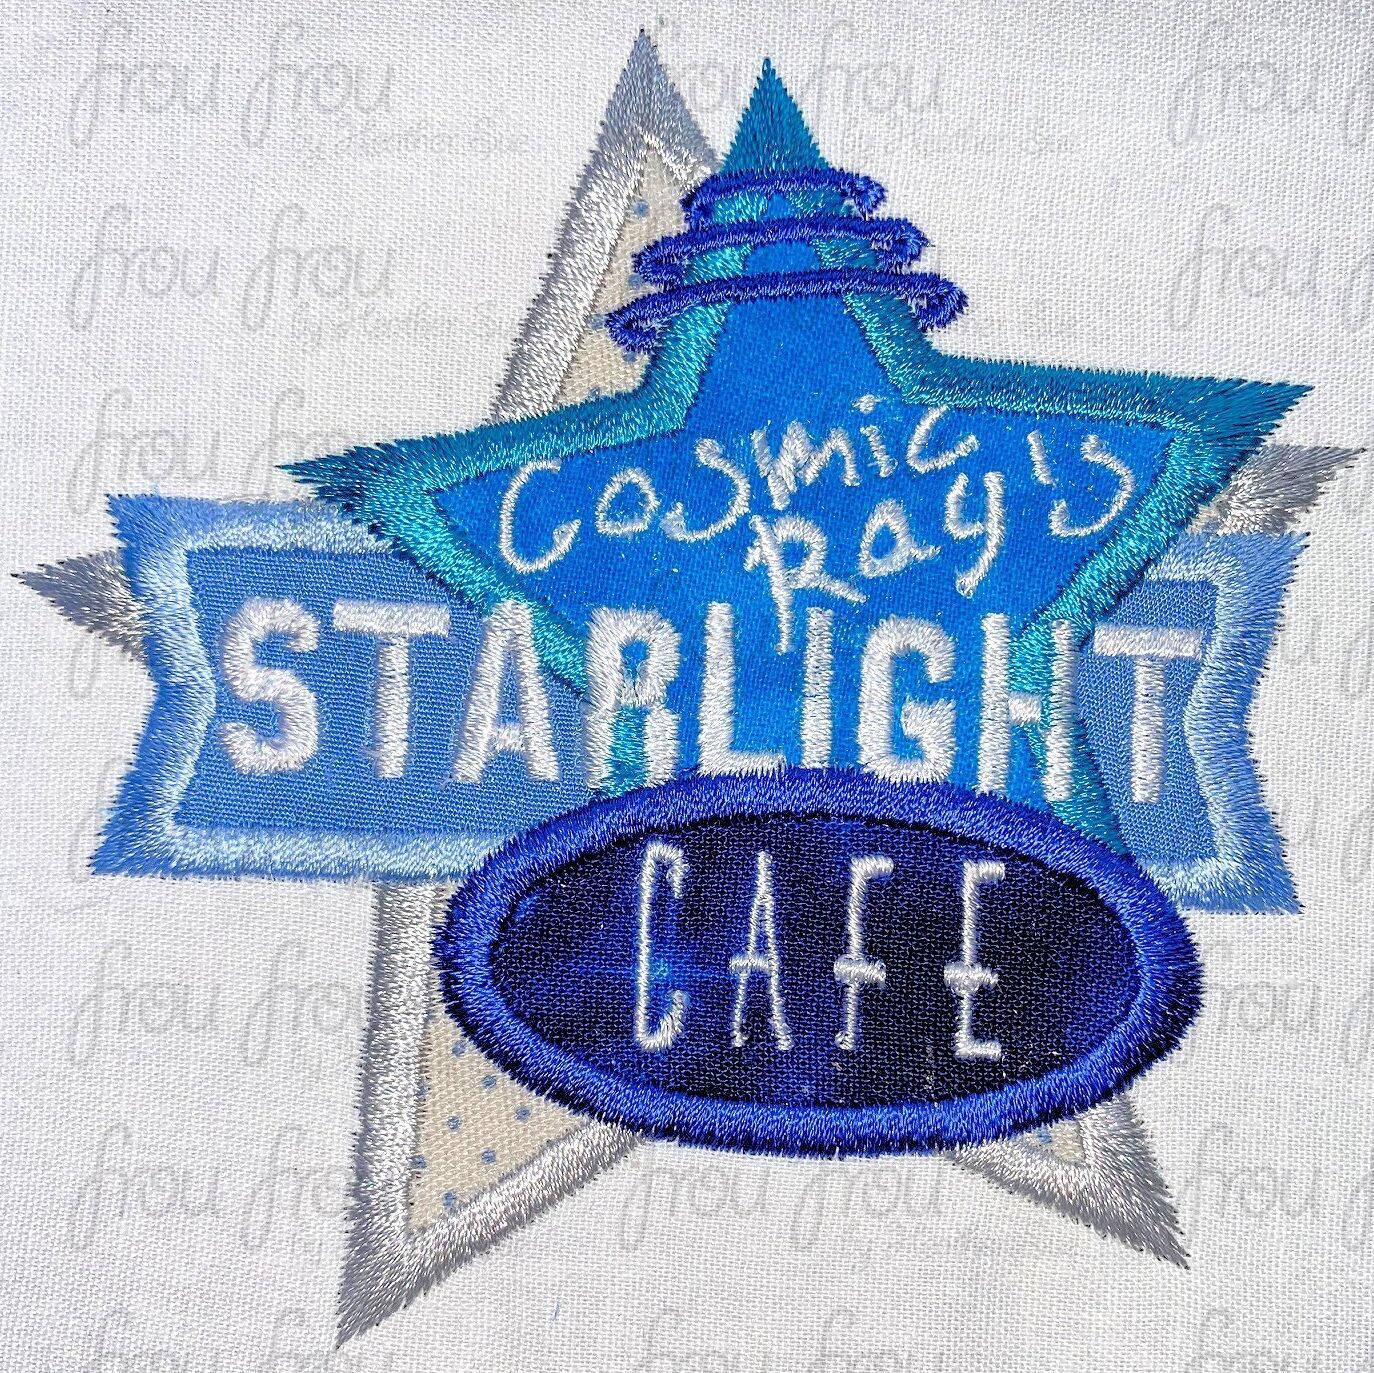 Cosmic Restaurant Starlight Cafe Logo Sign Wording Machine Applique and filled Embroidery Design, multiple sizes including 3